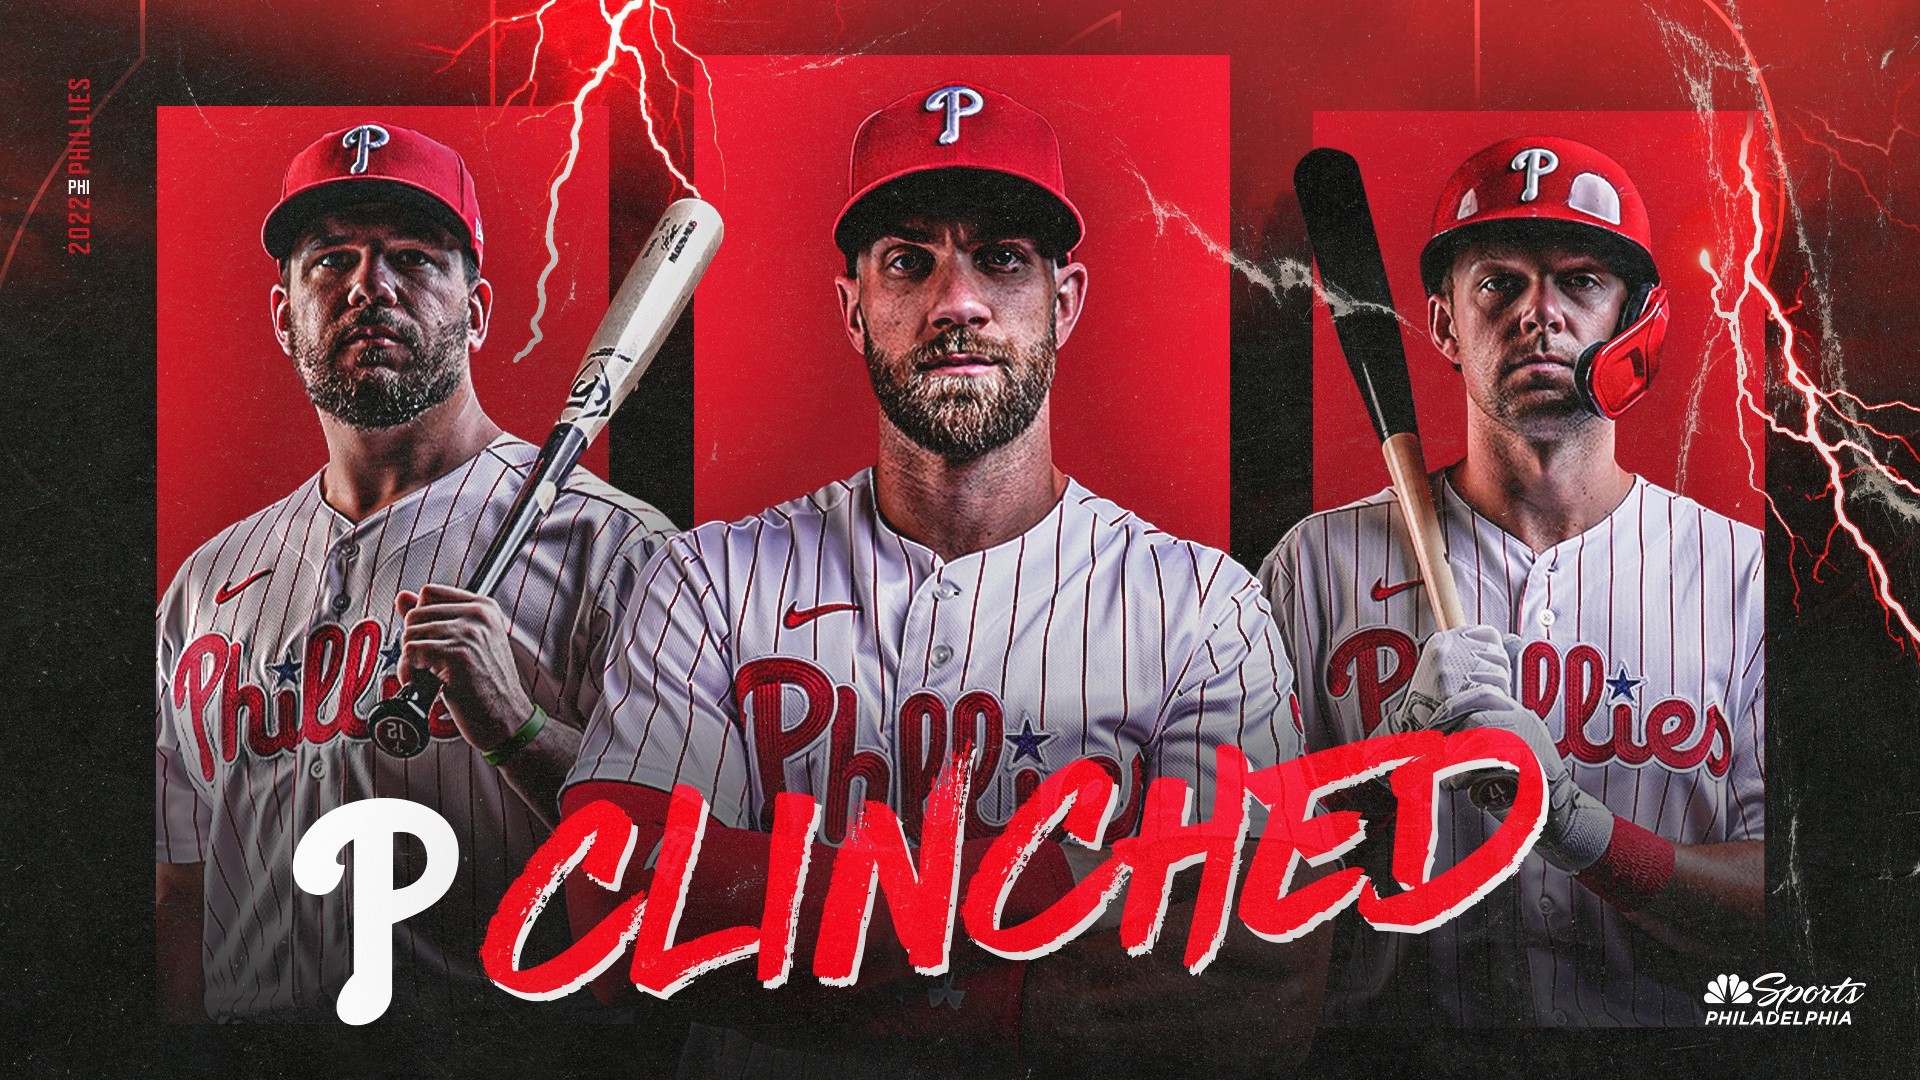 WATCH: The final out for the Phillies to clinch playoff berth